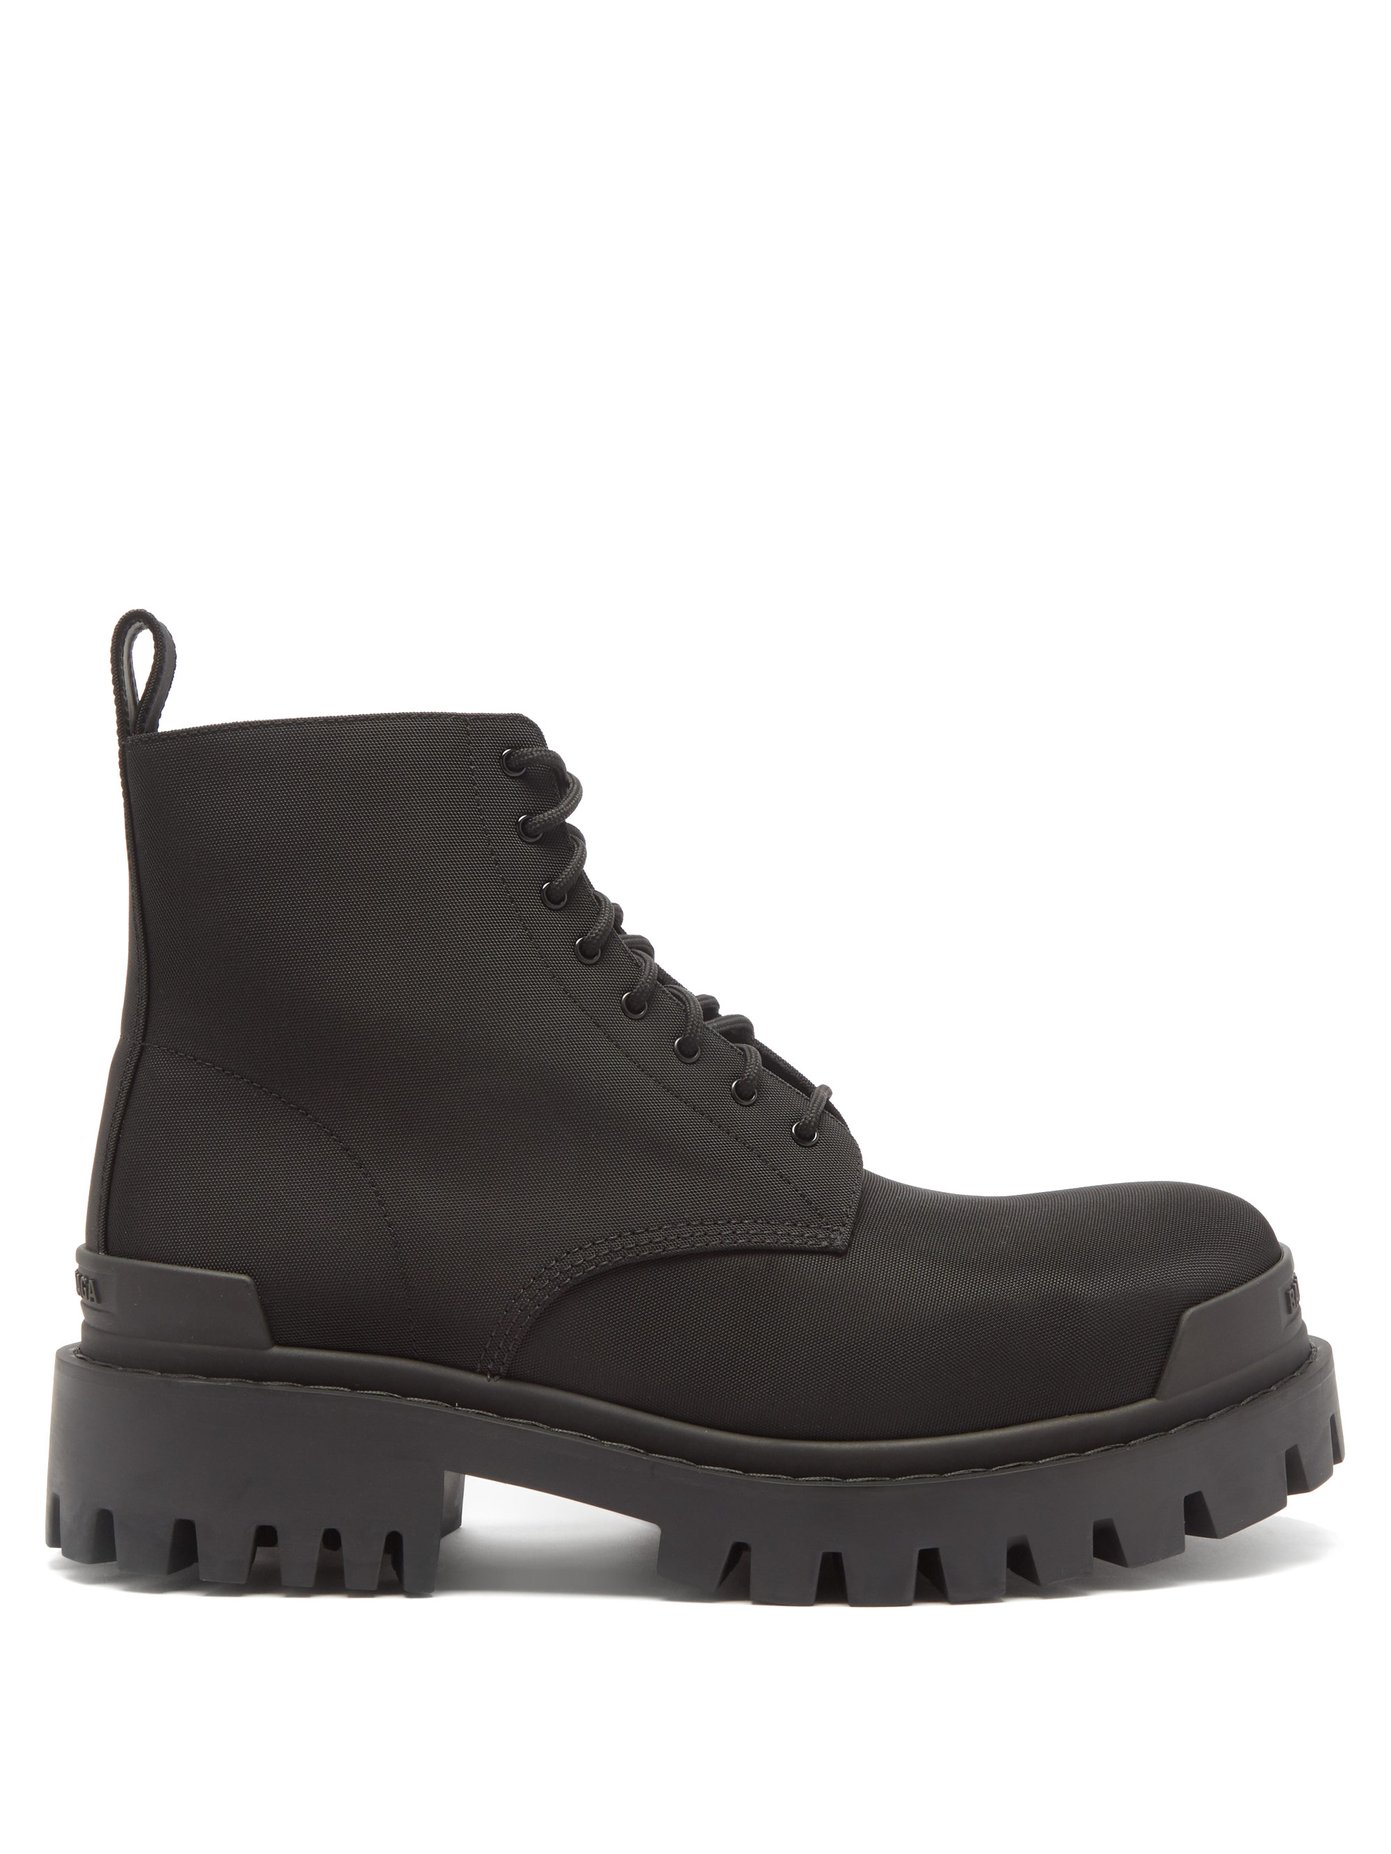 buy lace up boots